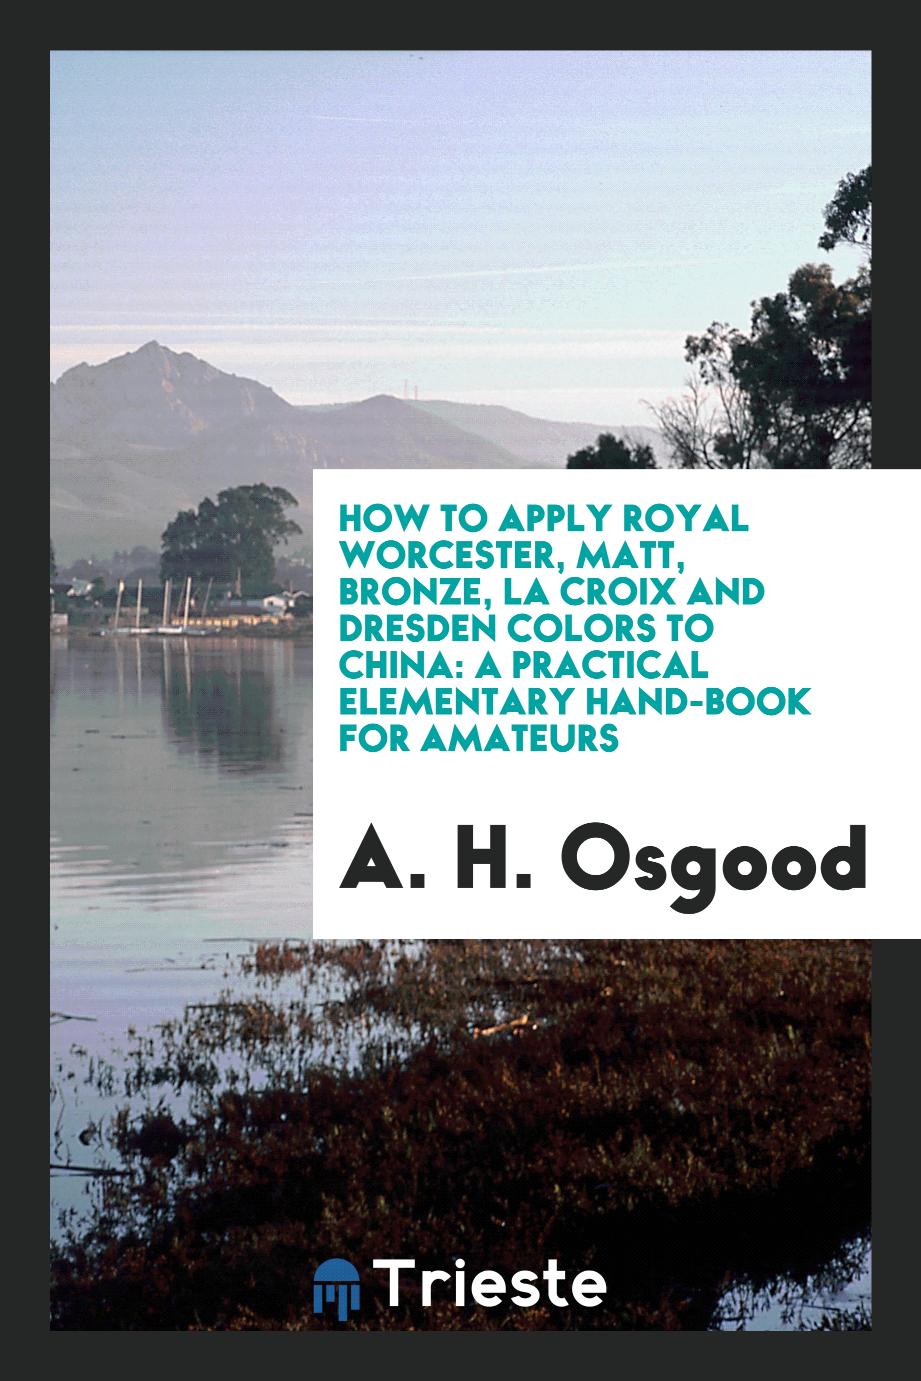 How to Apply Royal Worcester, Matt, Bronze, La Croix and Dresden Colors to China: A Practical Elementary Hand-Book for Amateurs